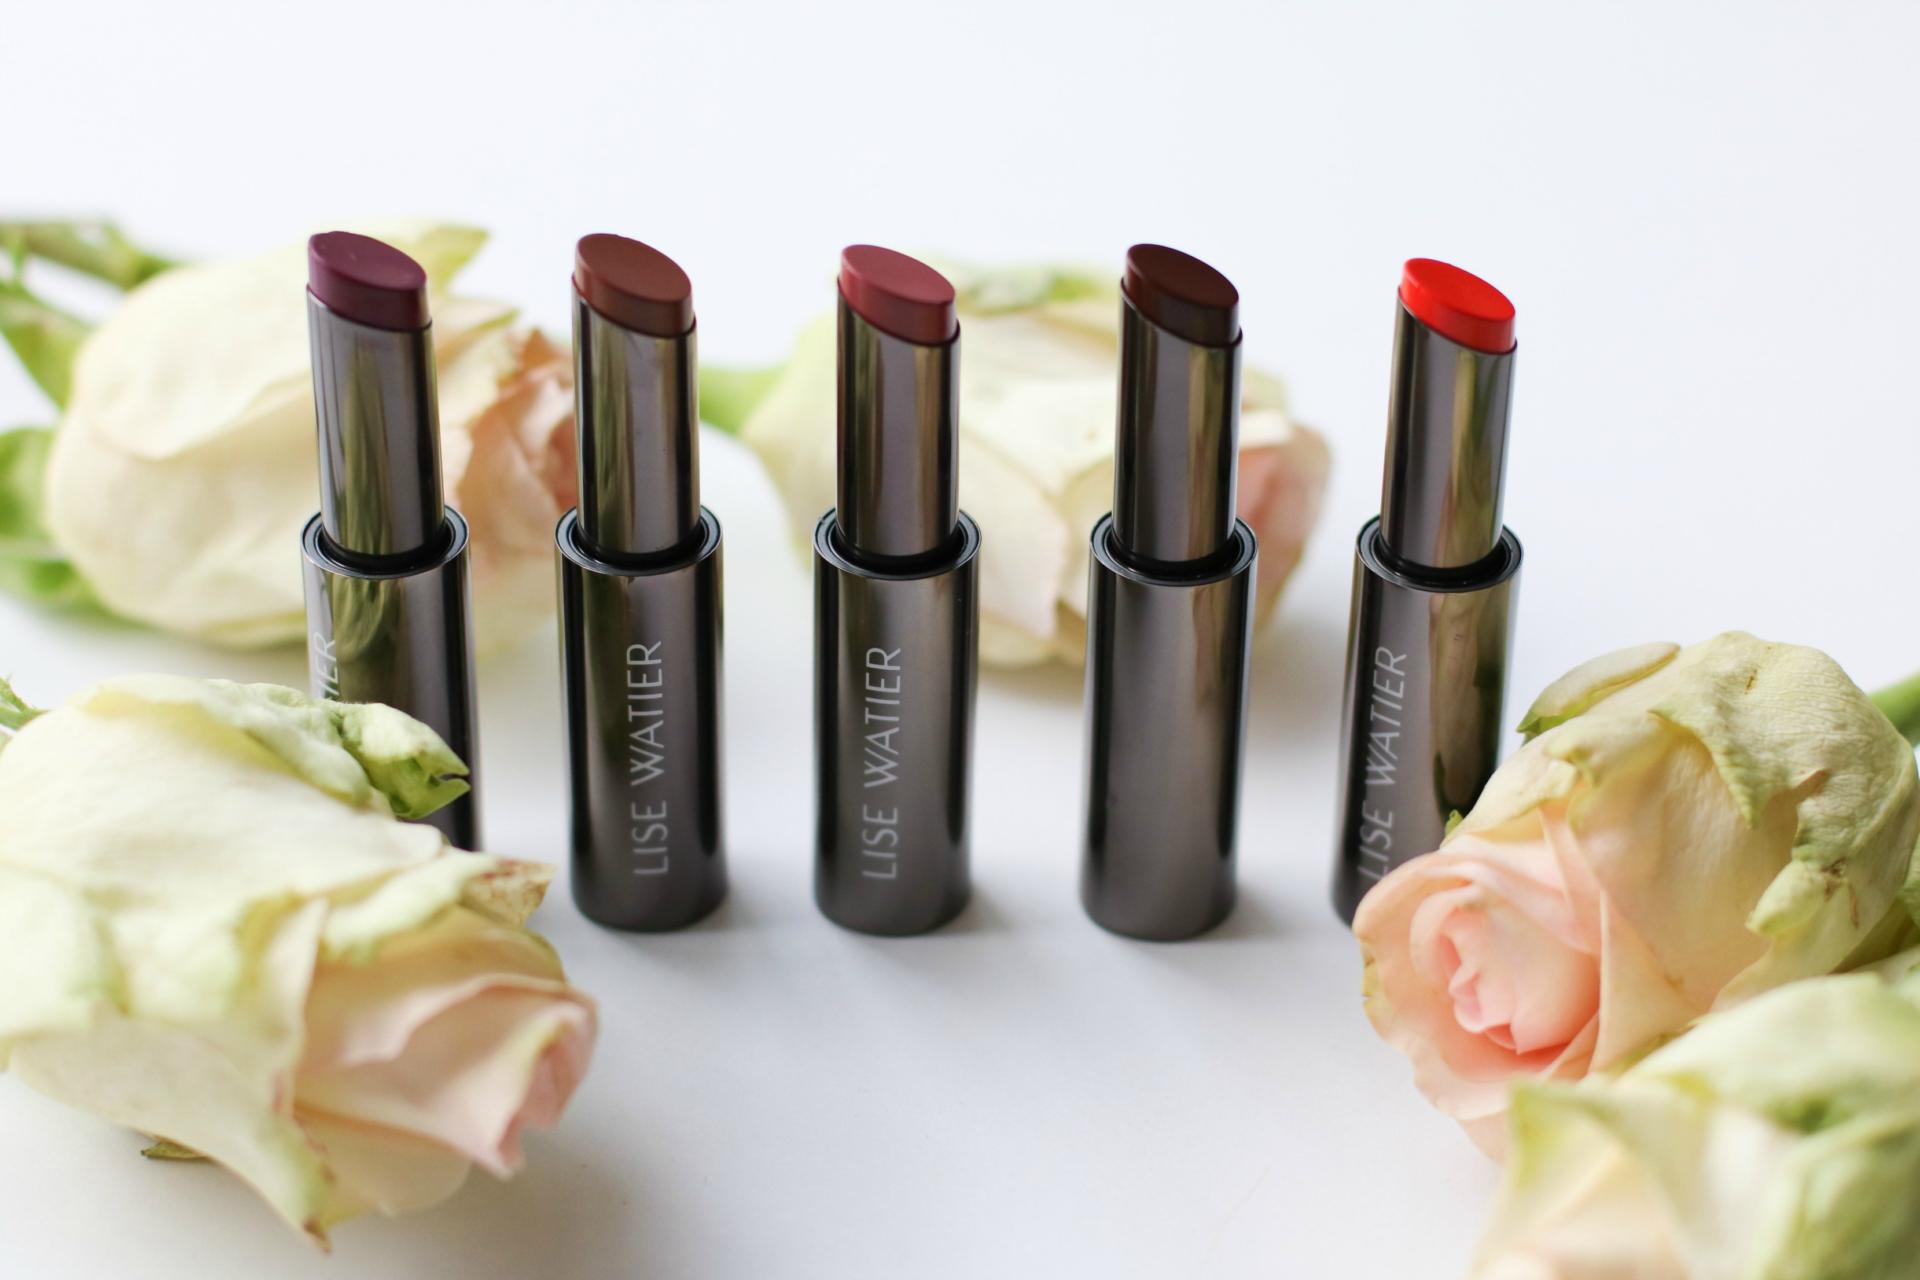 SD Beauty Review: Lise Watier's Spring 2017 Collections - Rouge Intense Suprême and Blossom Beauty